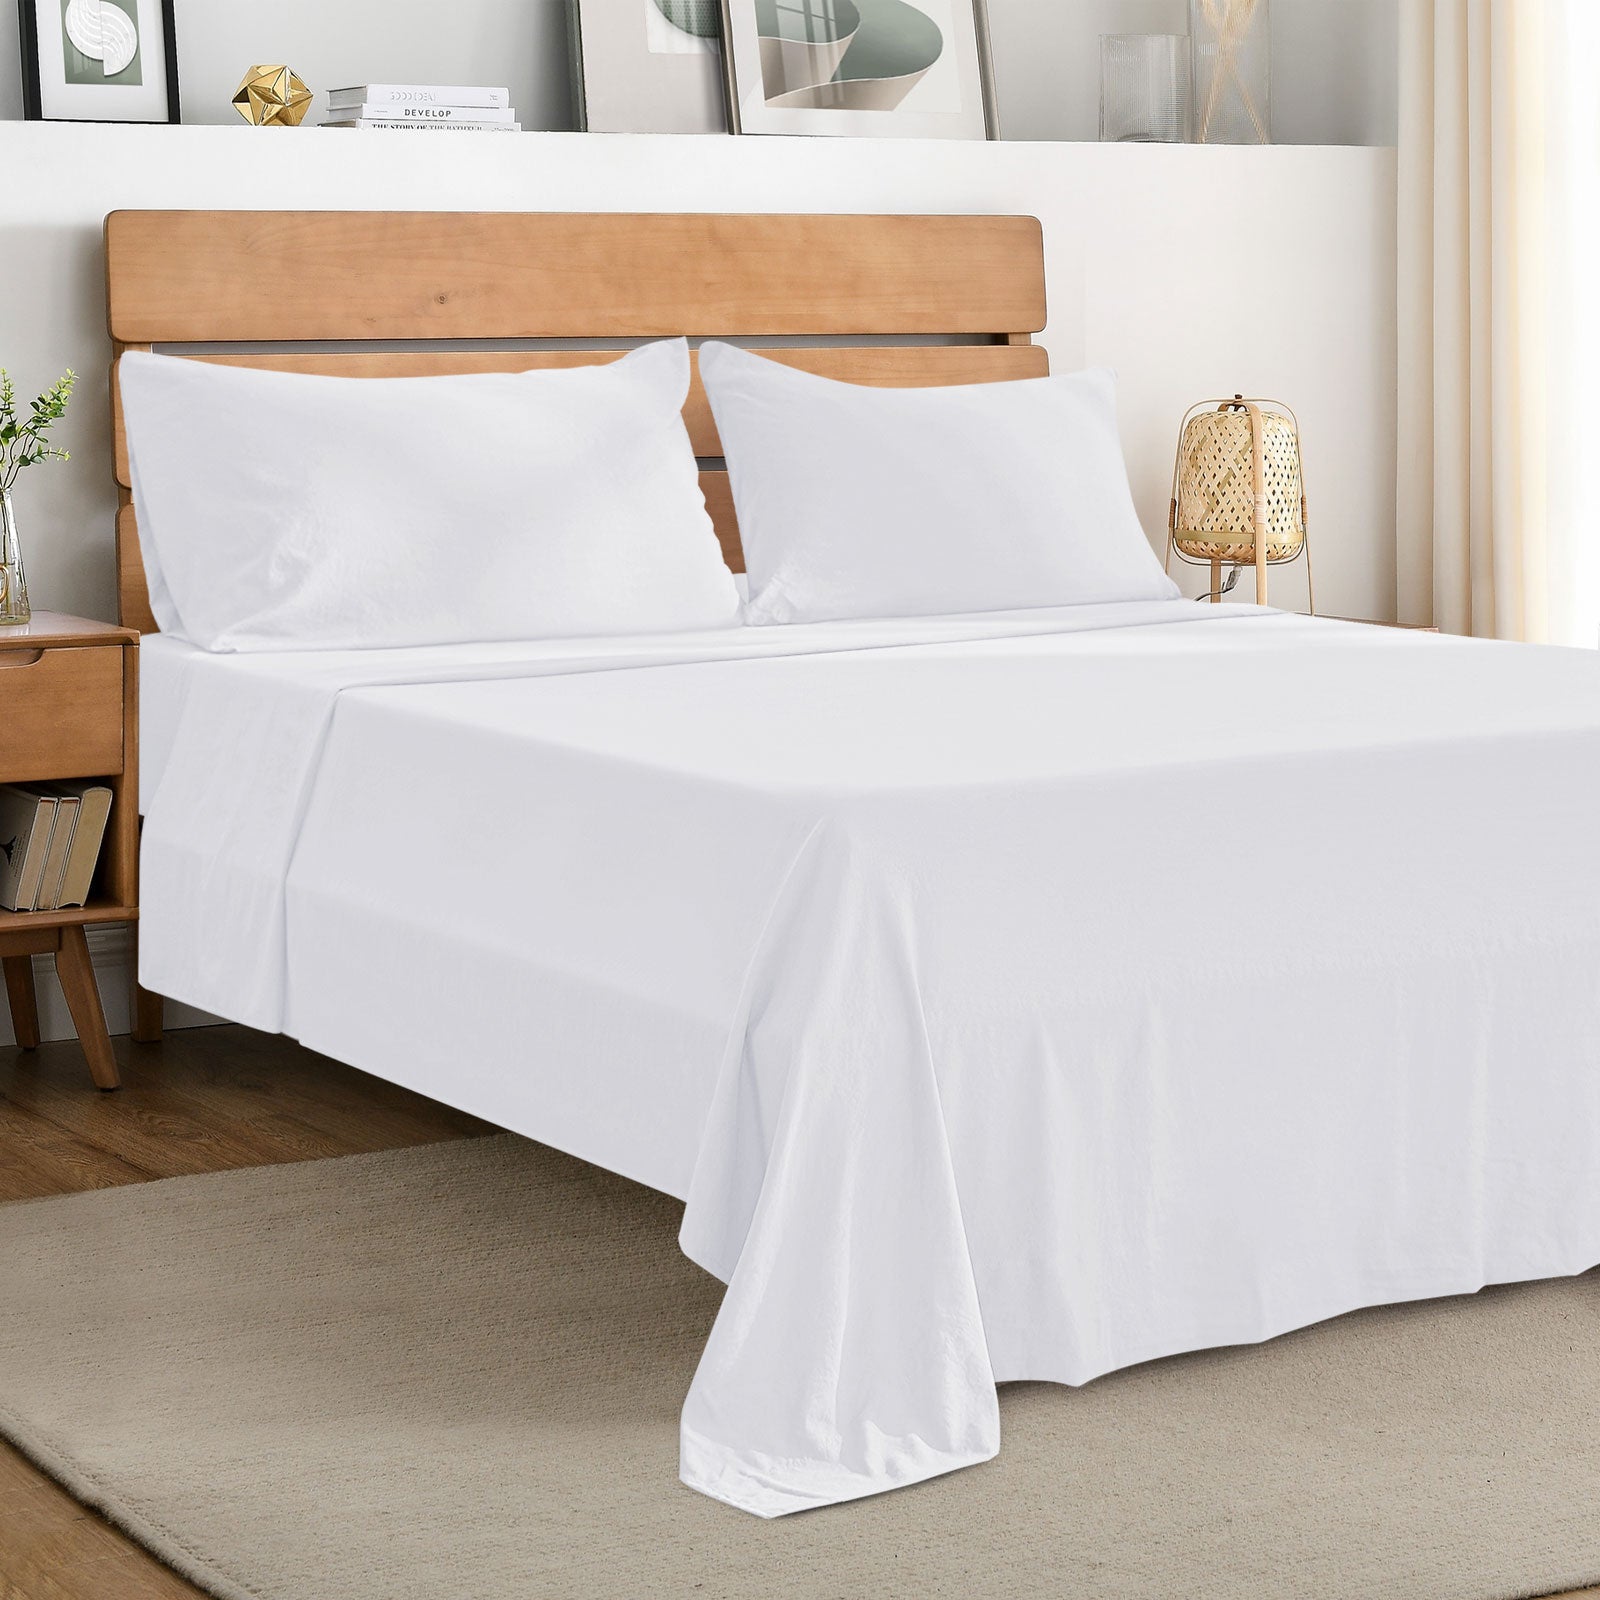 4-Piece Sheet Set - Extra Soft Bedding Sheets & Pillowcases with Deep Pockets - Hotel-Quality Sheets Set